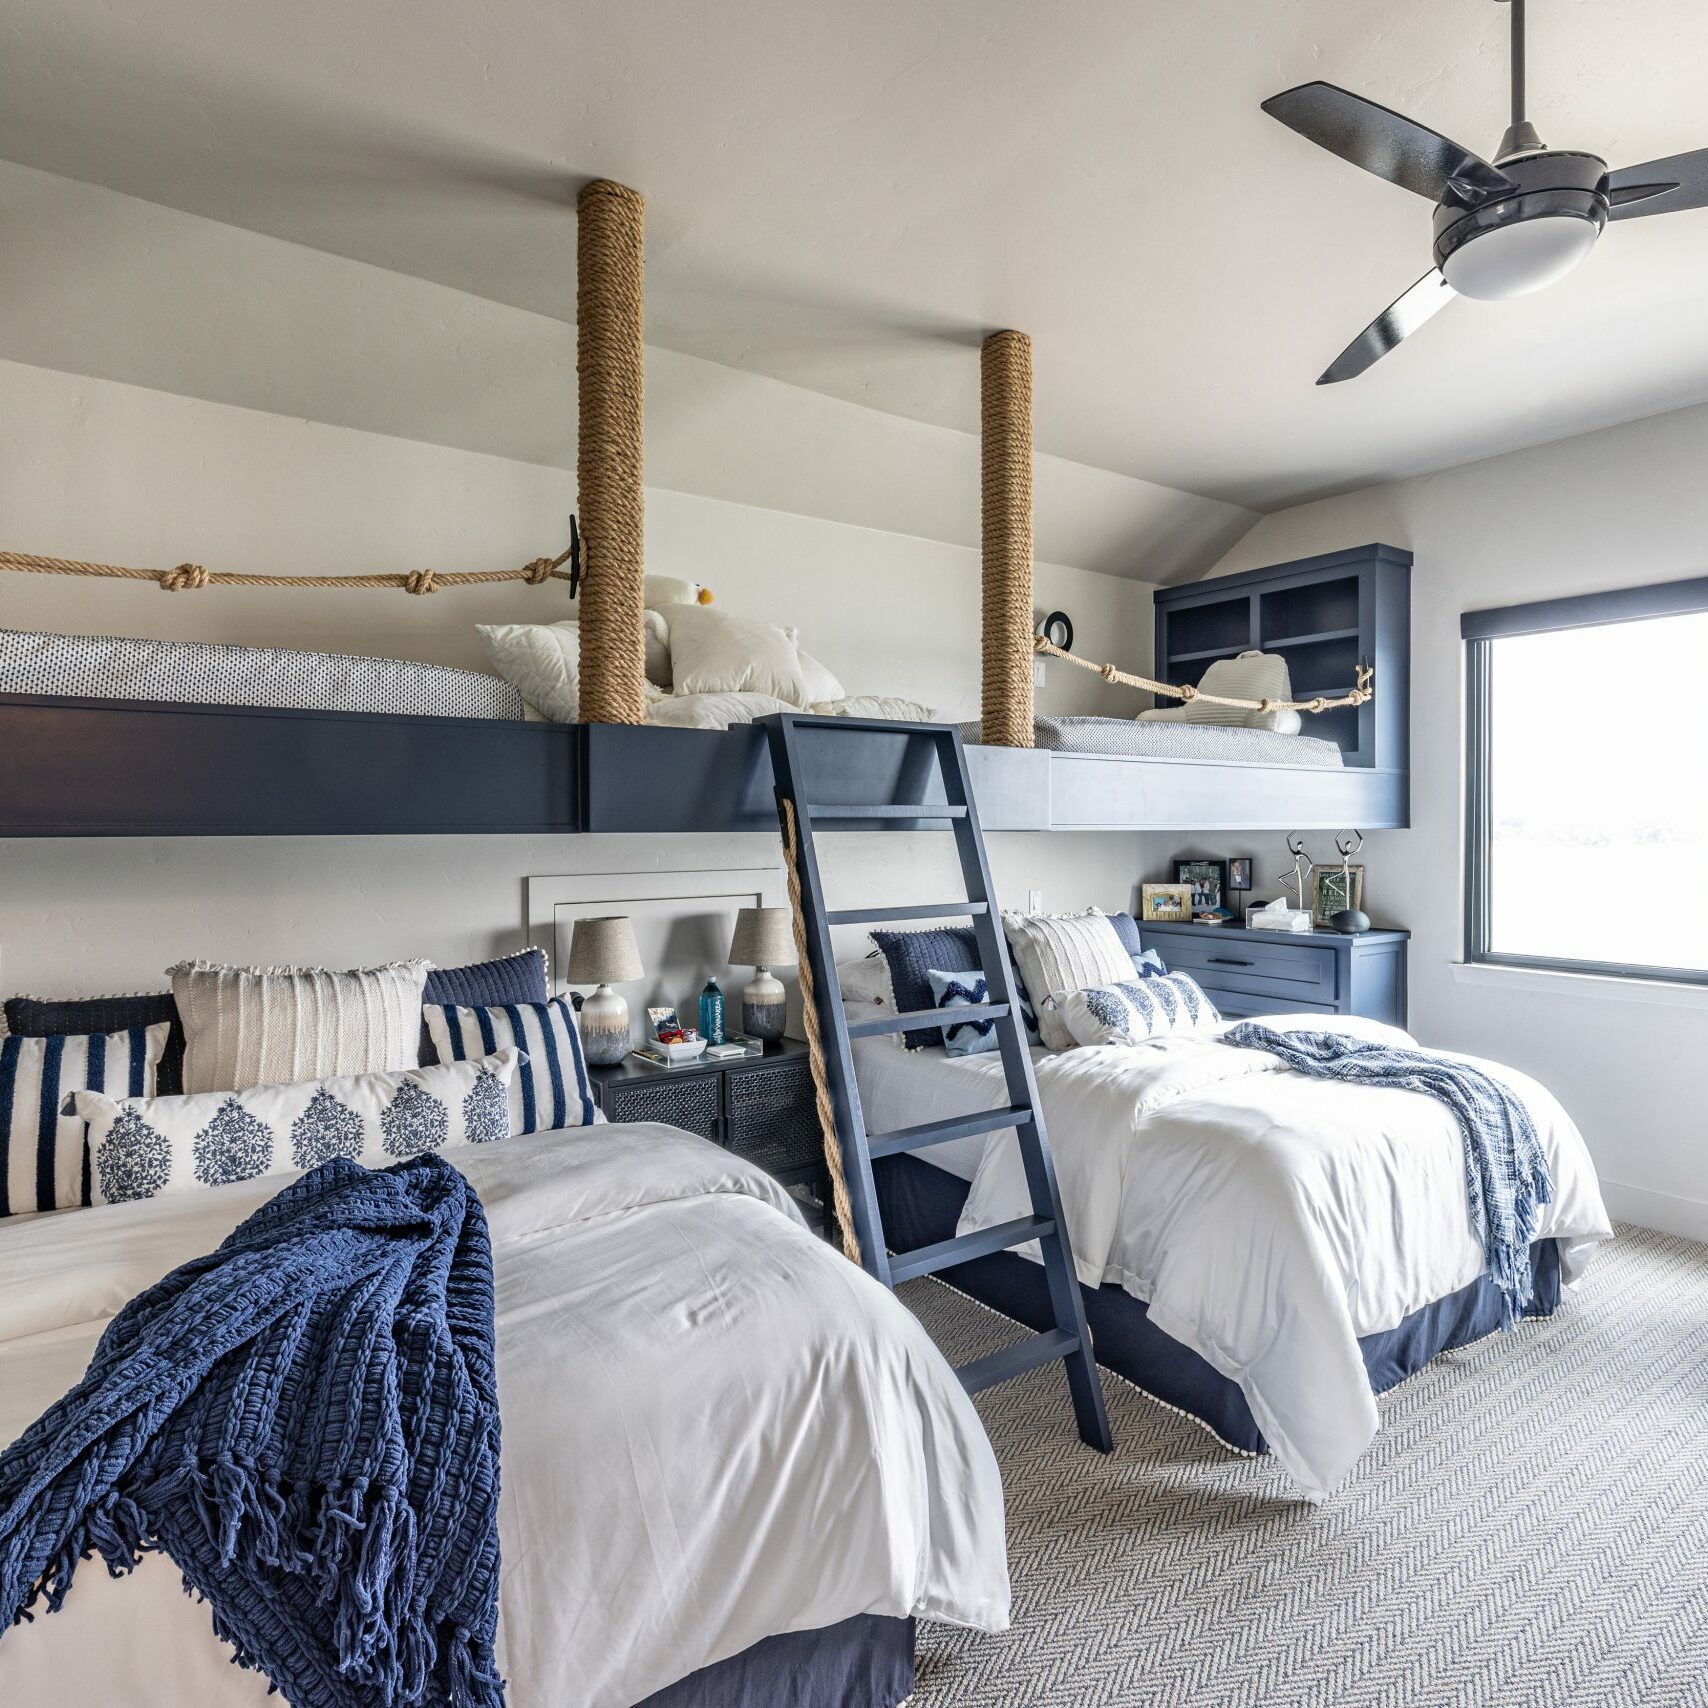 Lake house_Grandkids' room with loft bed and overstuffed bed with fluffy bedding and play area all with a nautical theme in second home vacation property in Possum Kingdom Lake Texas